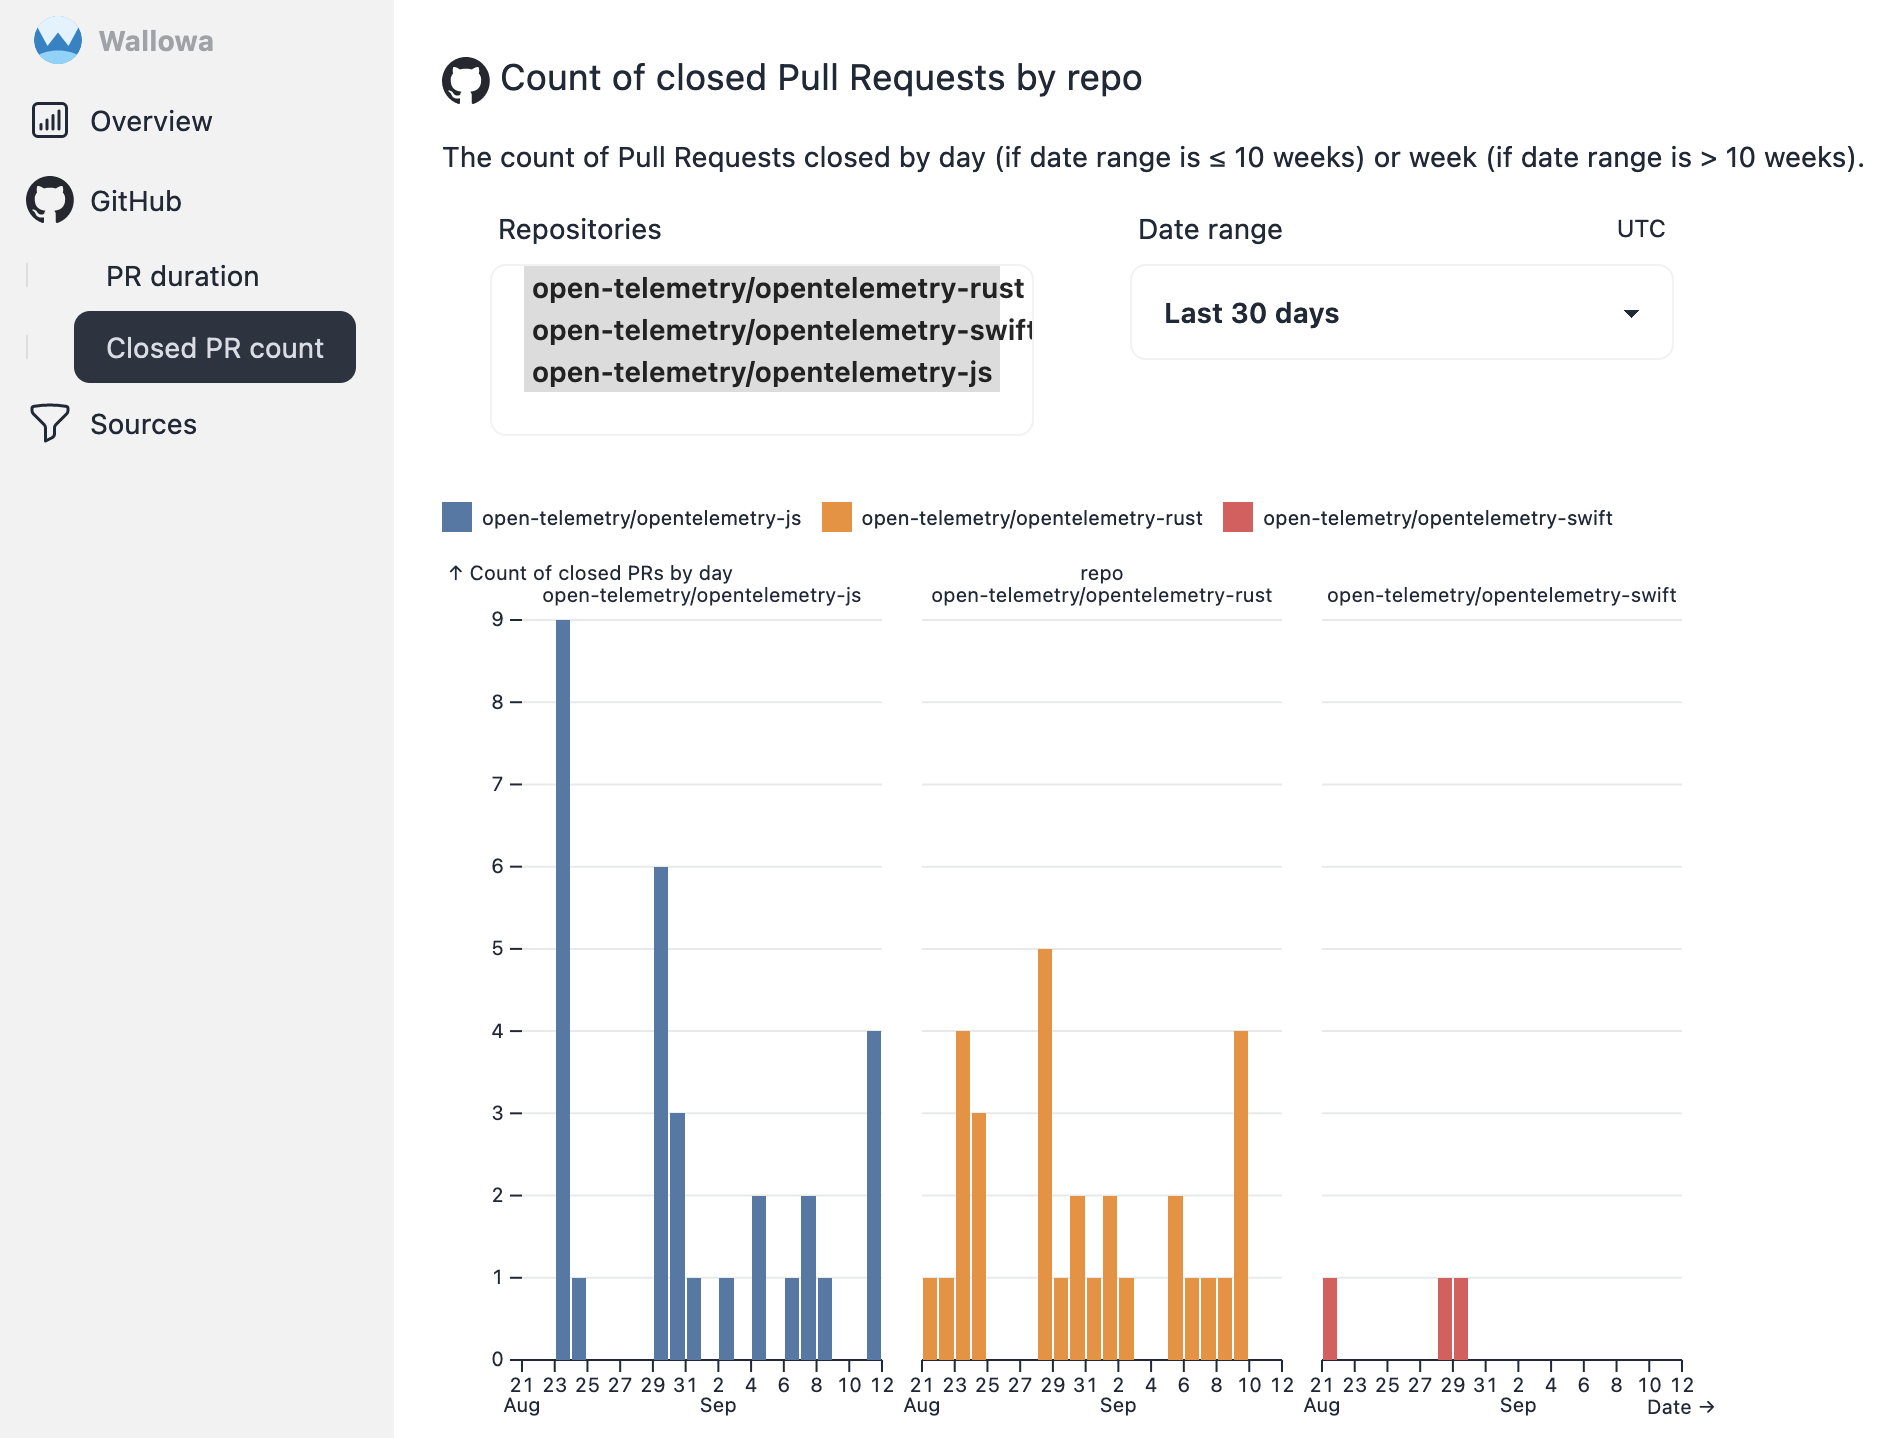 Screenshot of the count of closed Pull Requests by repo chart